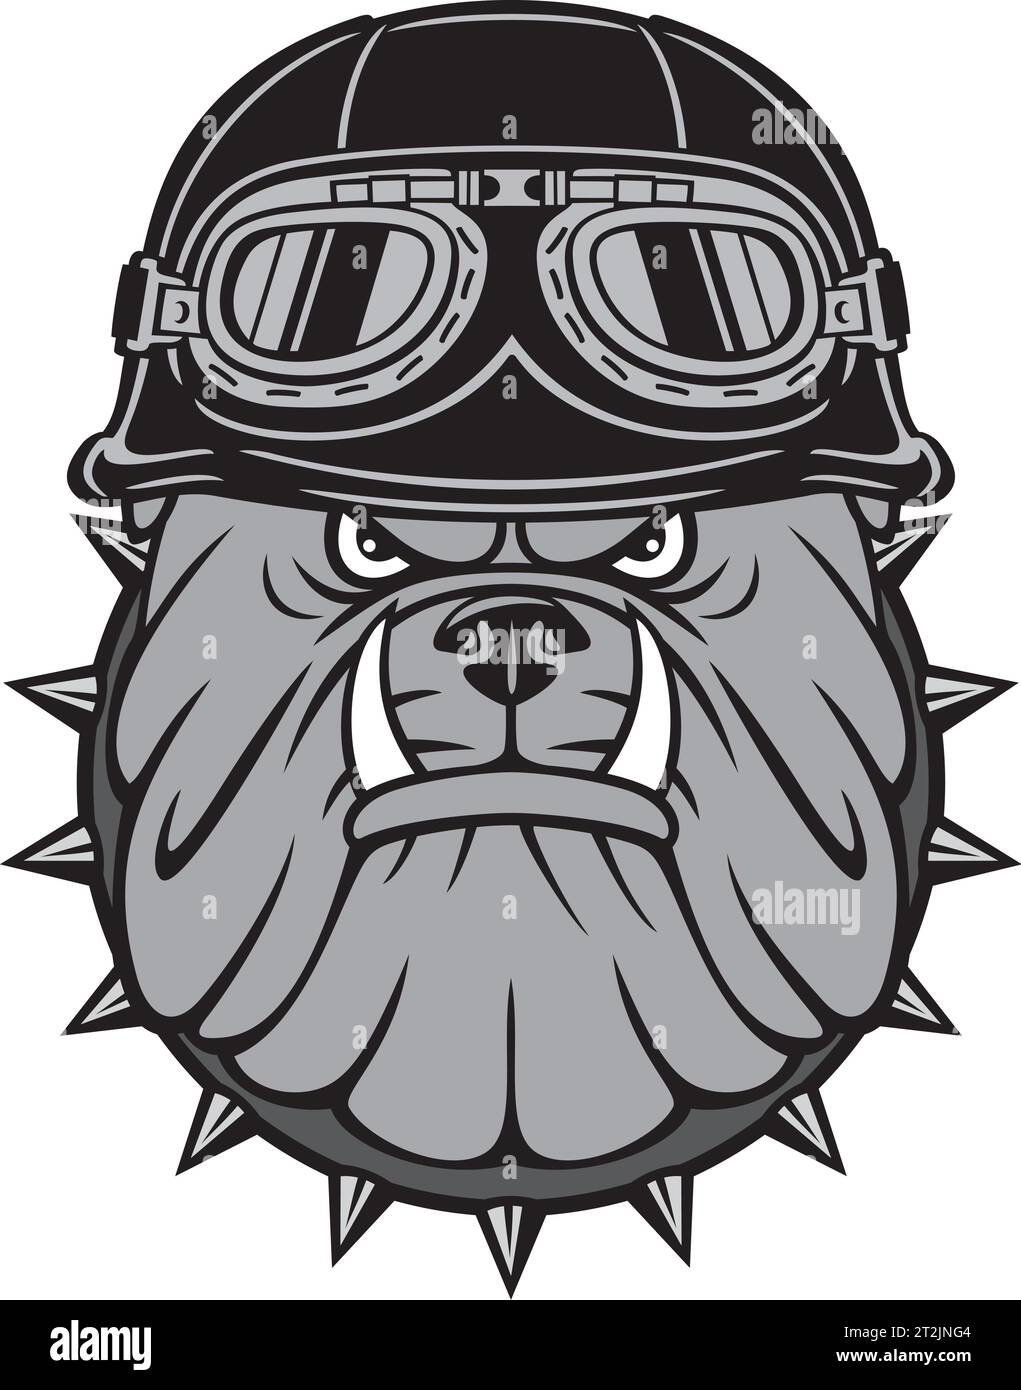 Angry Biker Bulldog Head with Motorcycle Helmet with Goggles Color. Vector Illustration. Stock Vector